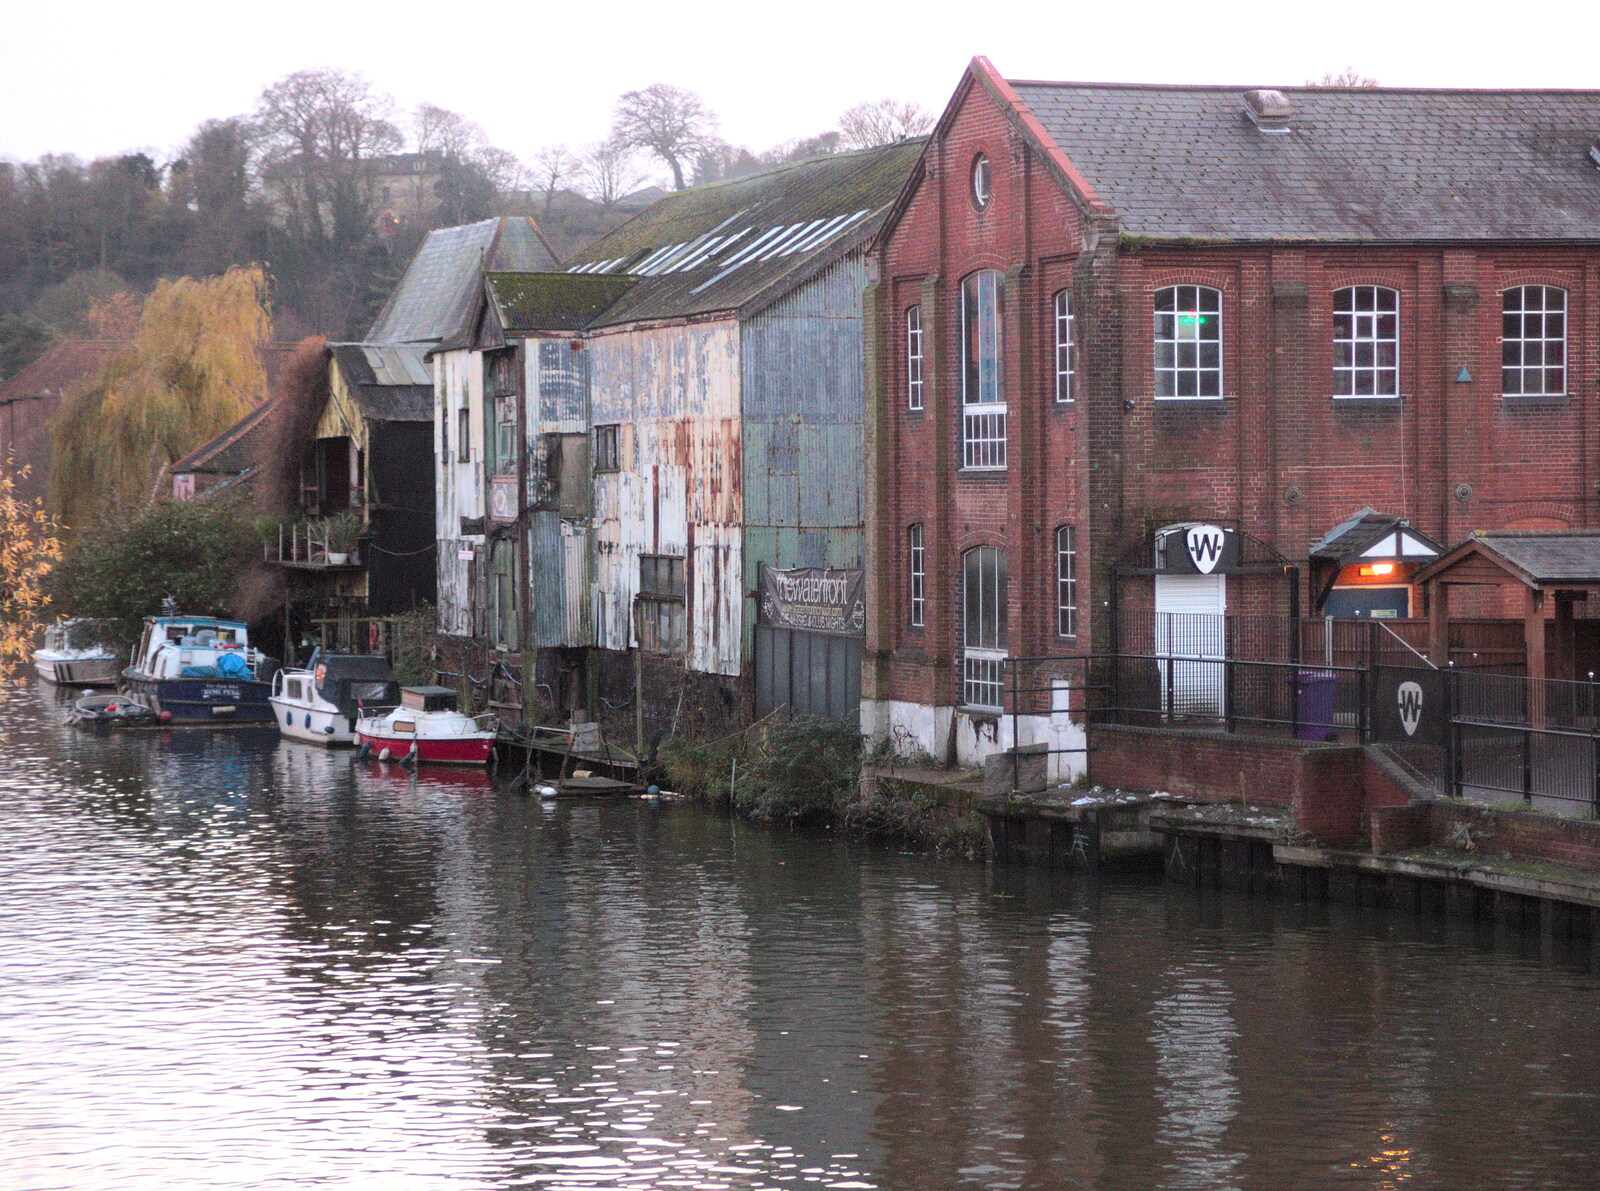 Derelict warehouse and The Waterfront from A Trip to the Cinema, Norwich, Norfolk - 3rd December 2017